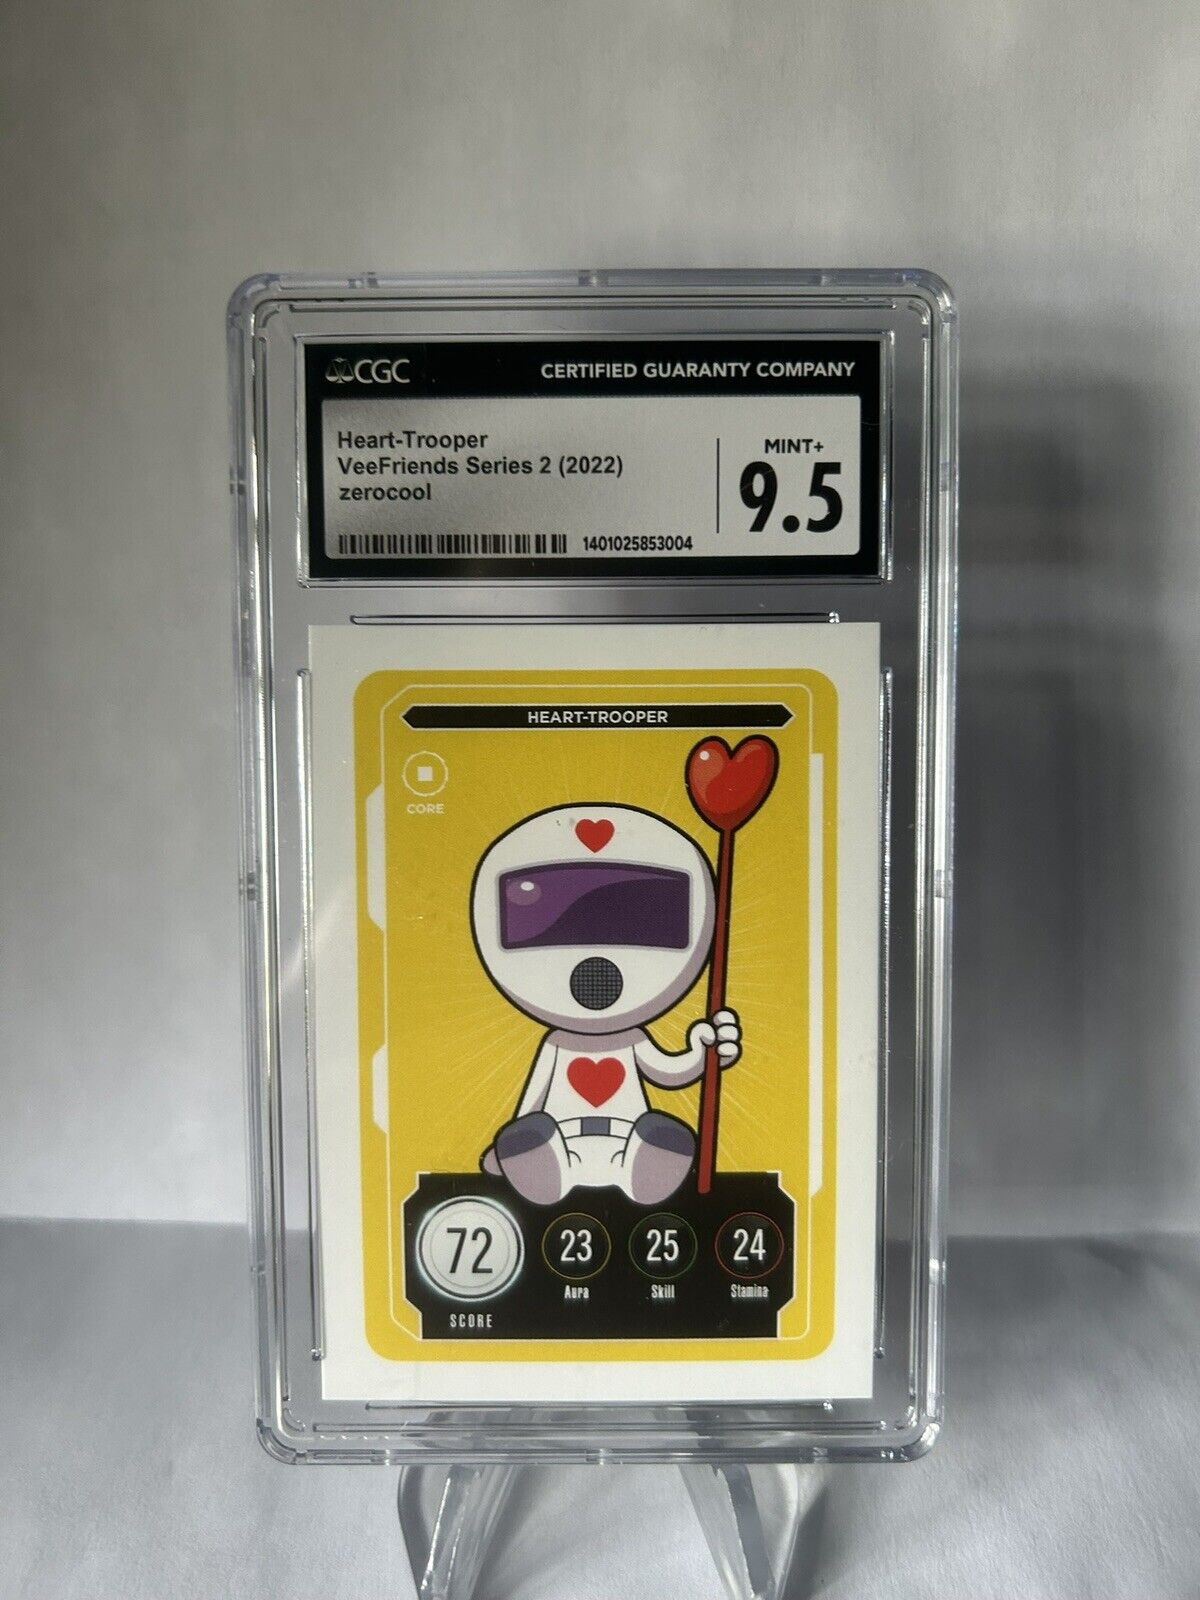 Heart-Trooper CGC 9.5 Mint + VeeFriends Series 2 Compete and Collect